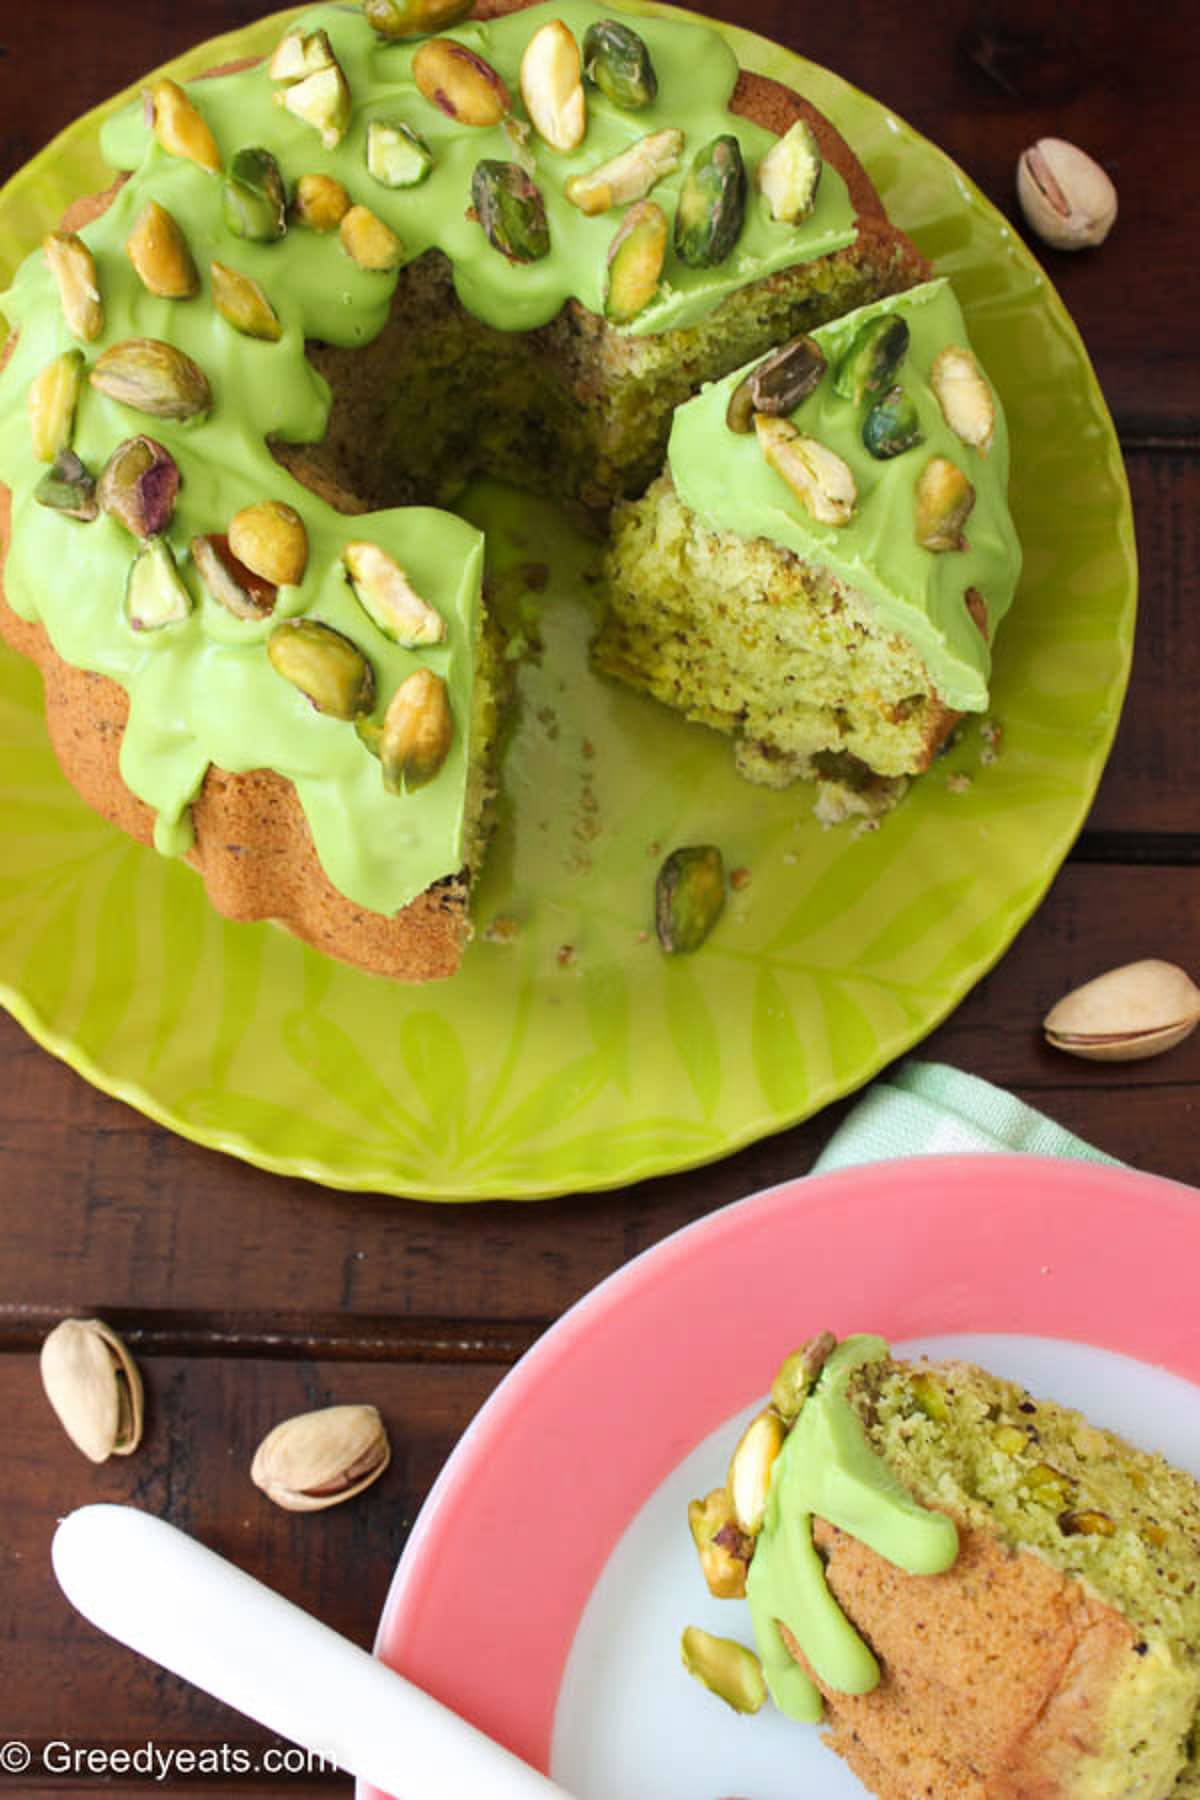 Made without pistachio pudding, this pistachio cake is topped with melted chocolate topping.